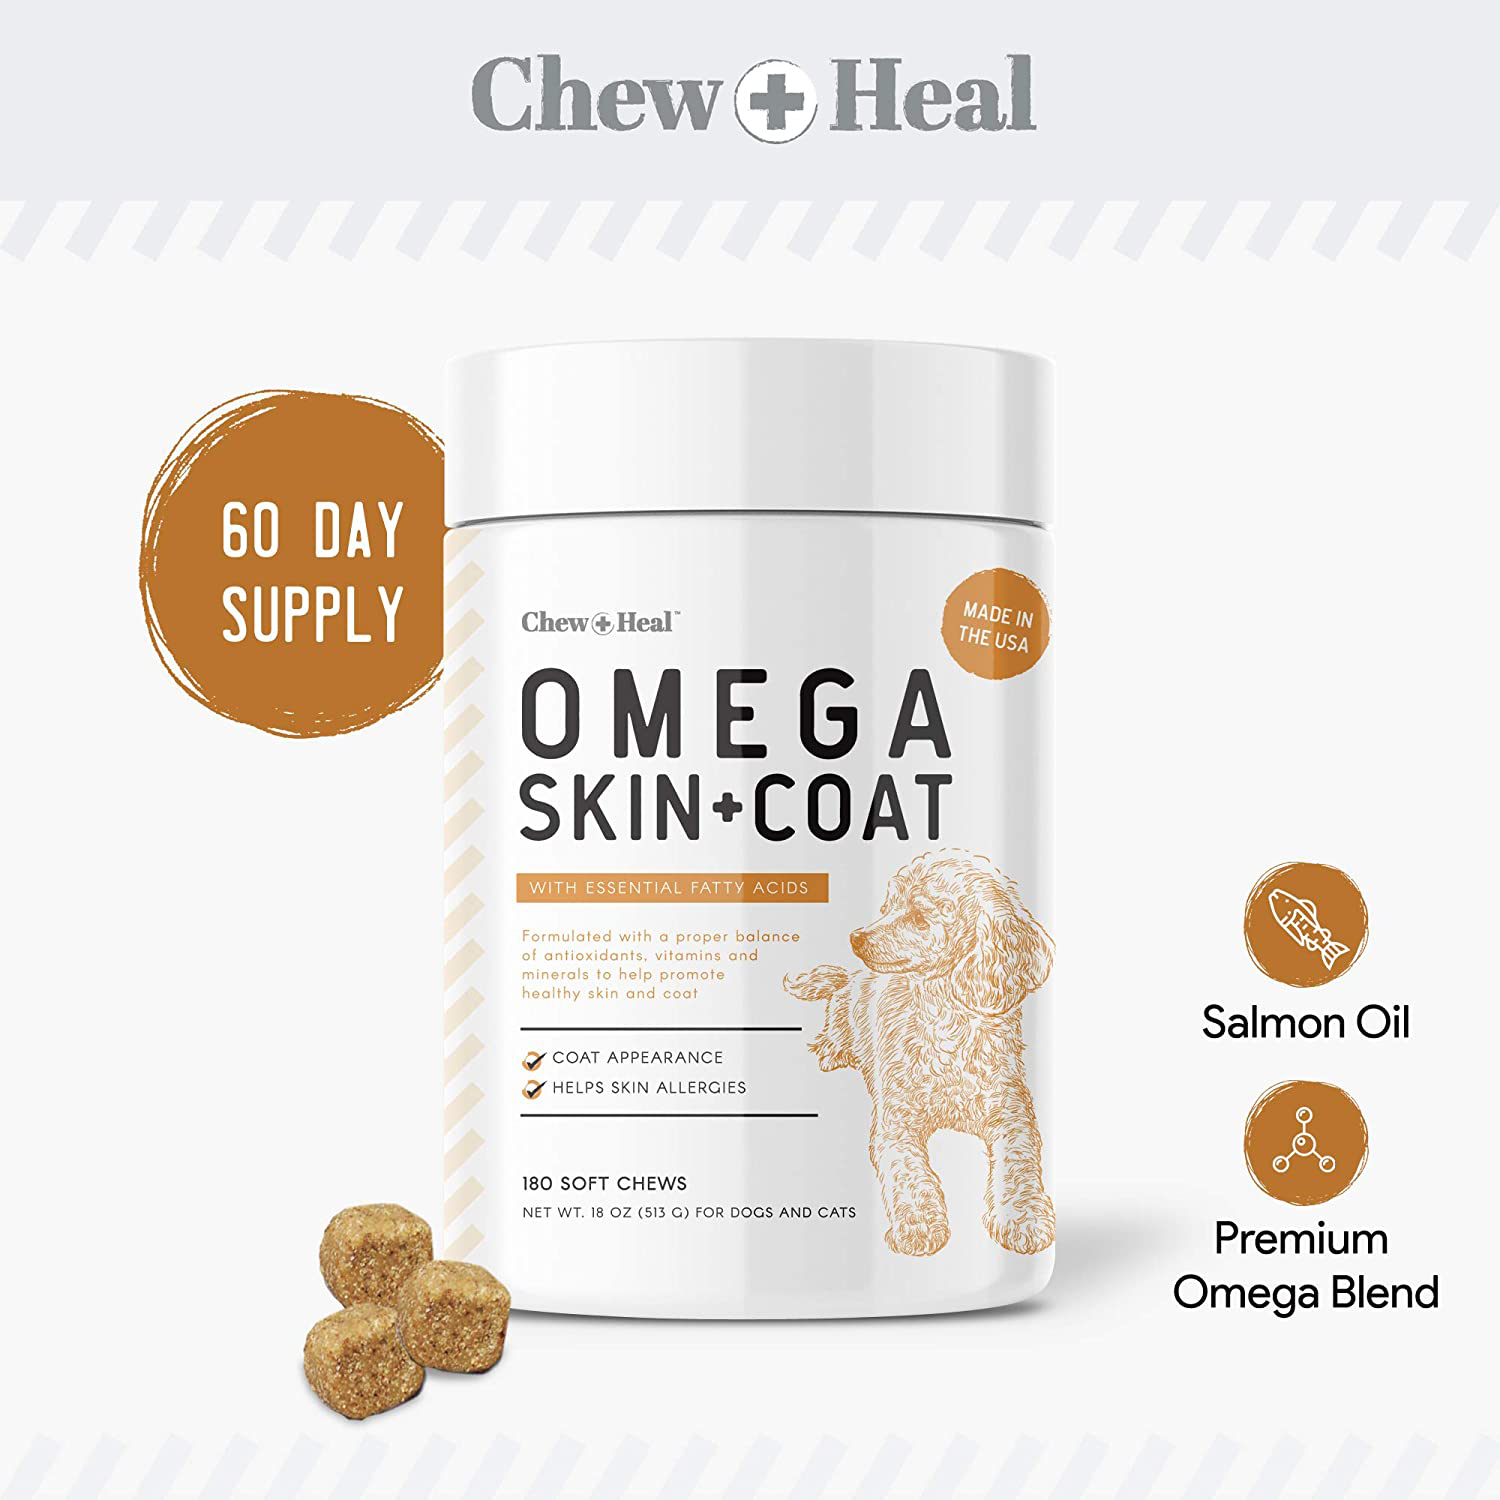 Omega Treats for Skin and Coat - Fish Oil Blend of Essential Fatty Acids, Omega 3, 6, and 9, Vitamins, Antioxidants and Minerals - Made in USA